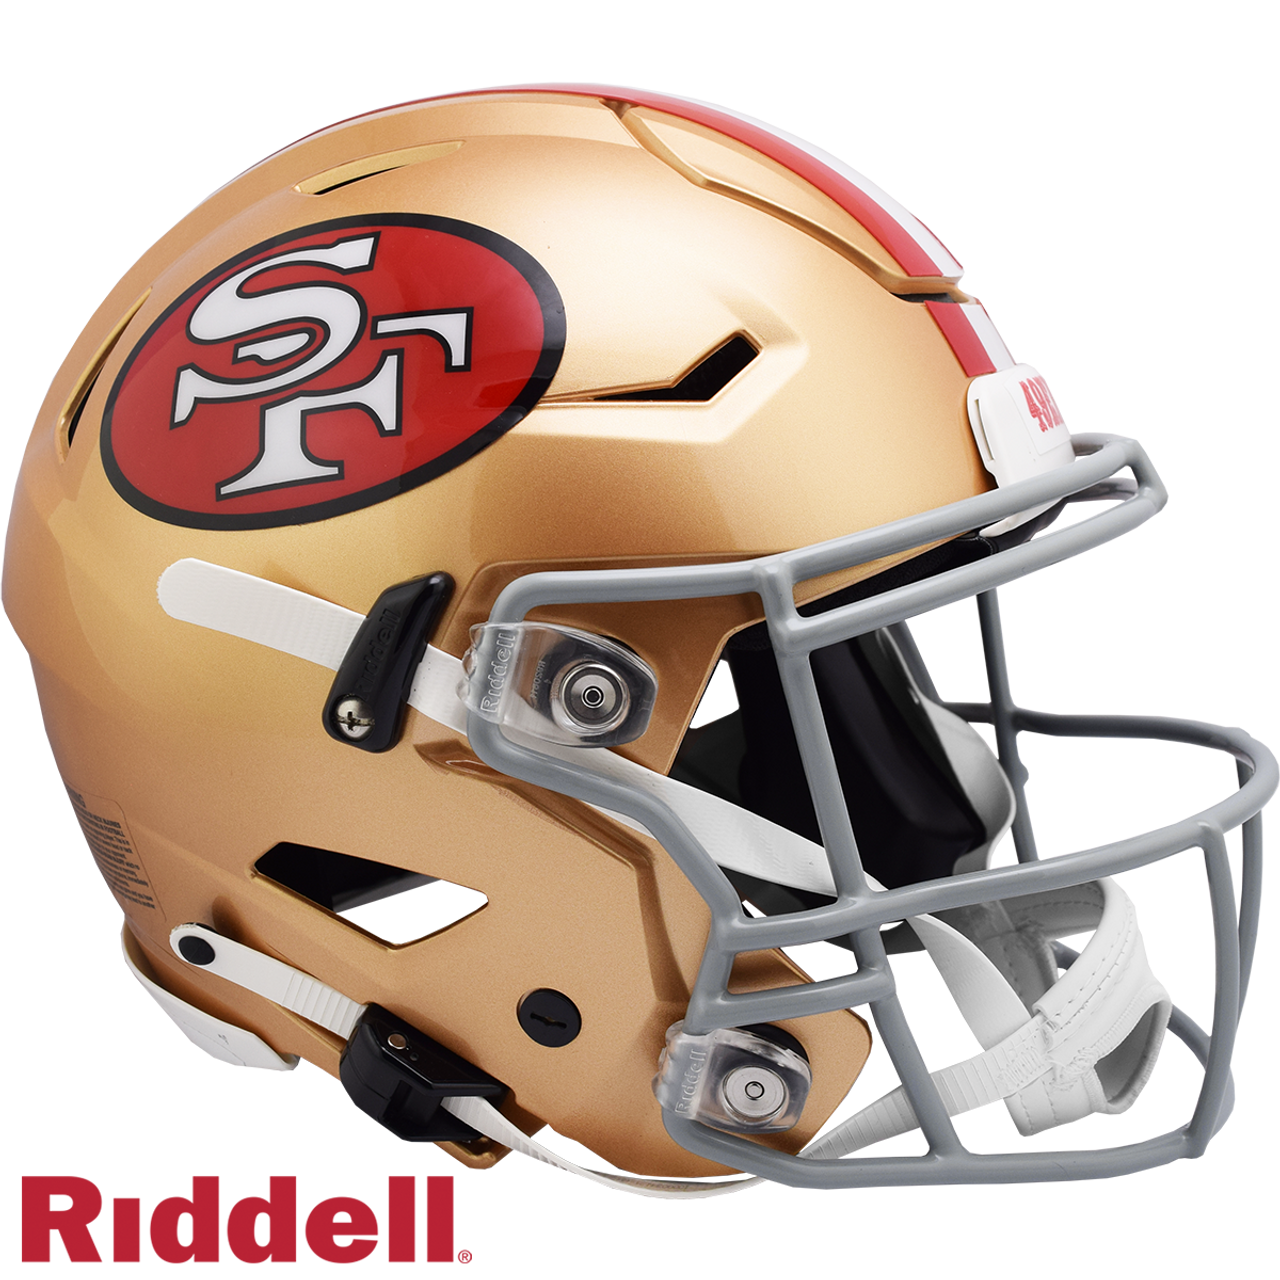 San Francisco 49ers Riddell Speed Authentic Full Size Football